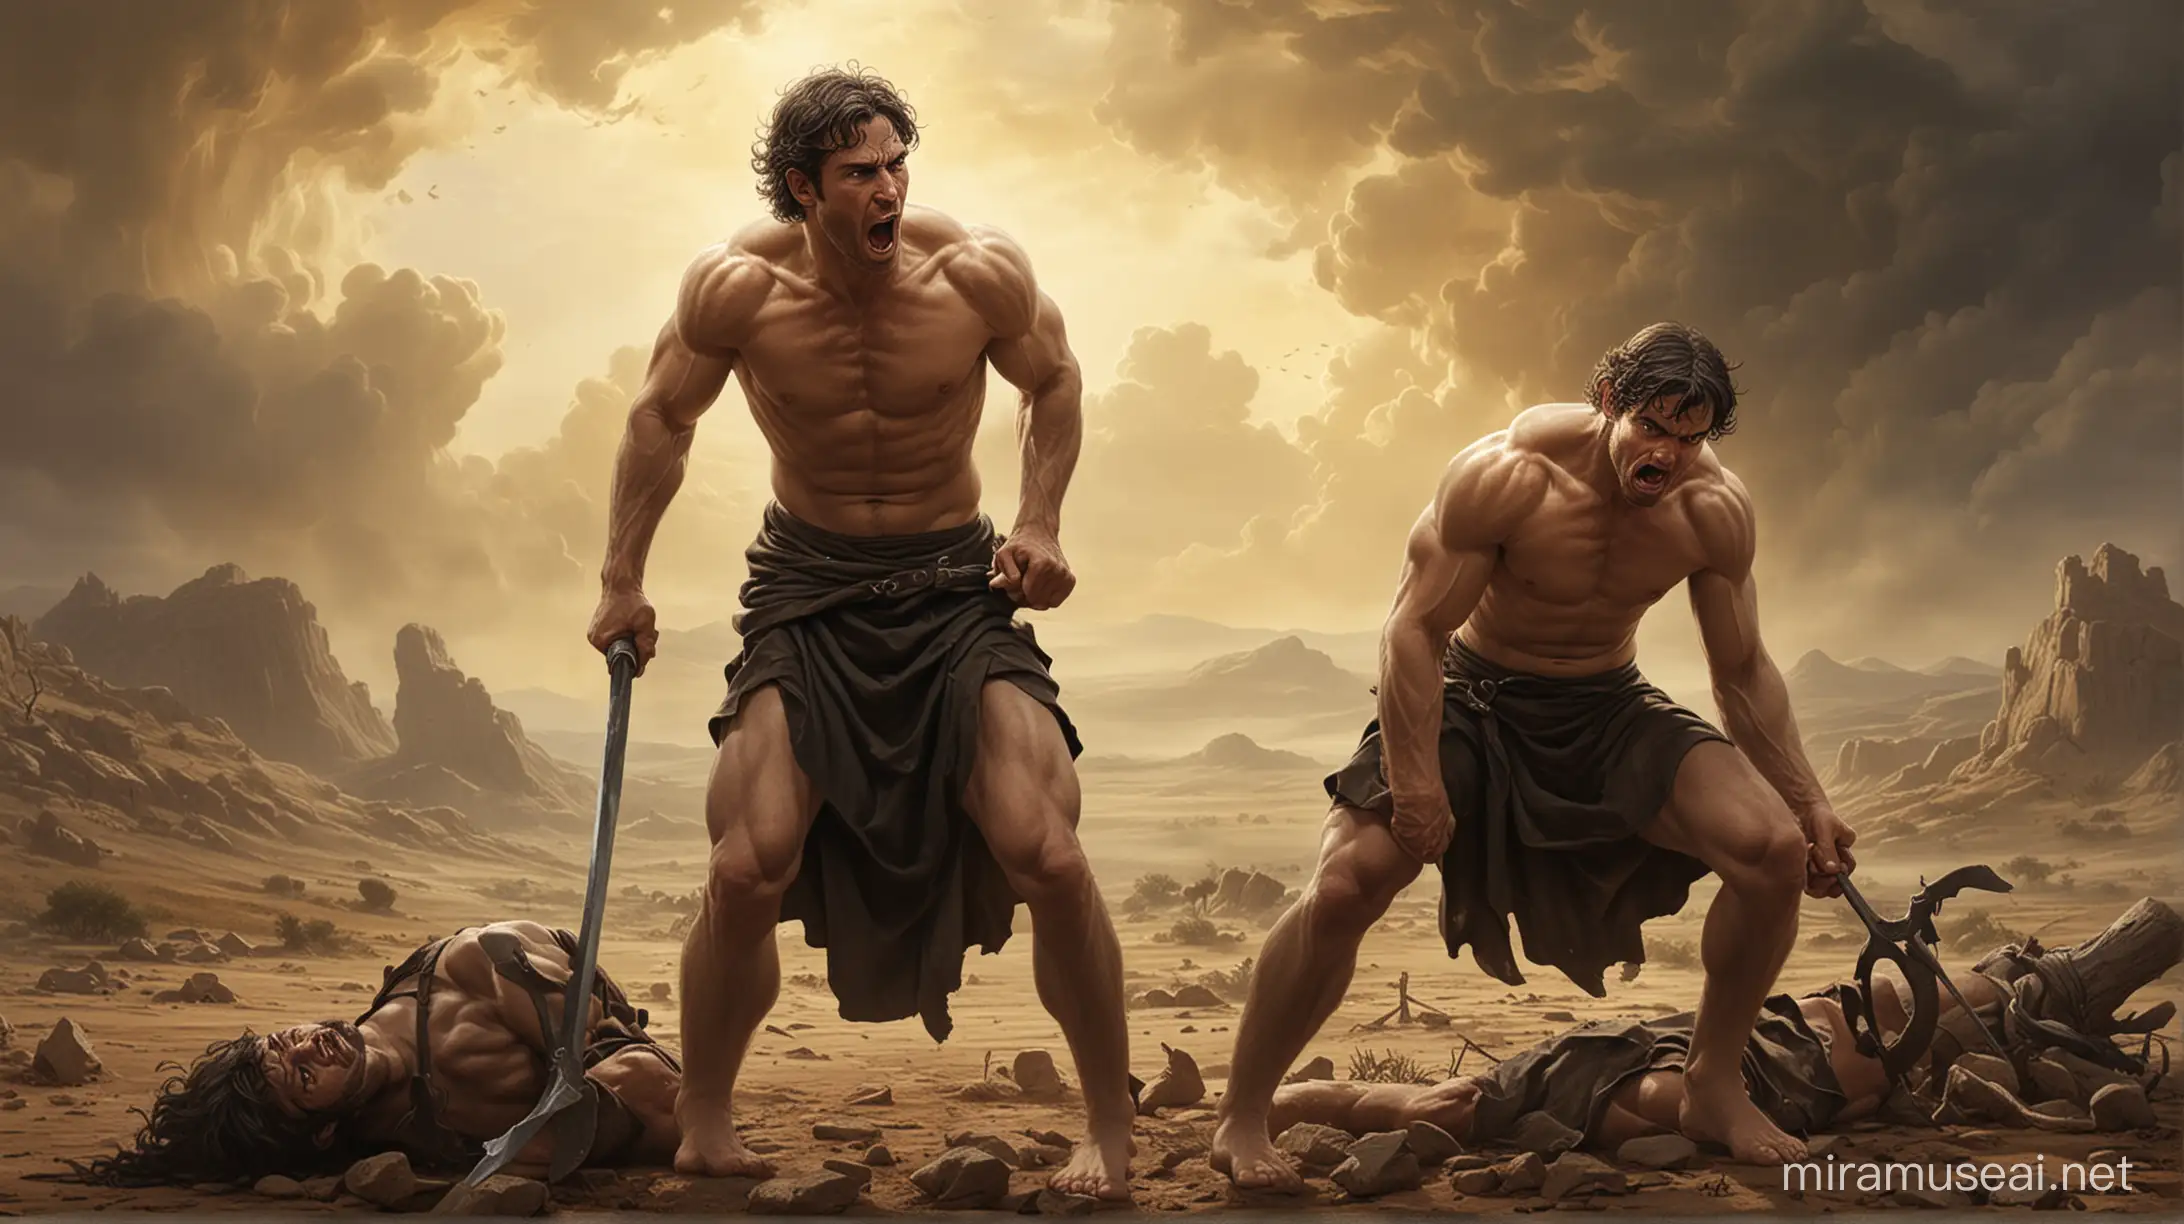 Create an evocative illustration depicting the tragic biblical scene of Cain slaying Abel. Capture the anguish, betrayal, and remorse in their expressions, amidst a desolate landscape under the weight of divine judgment